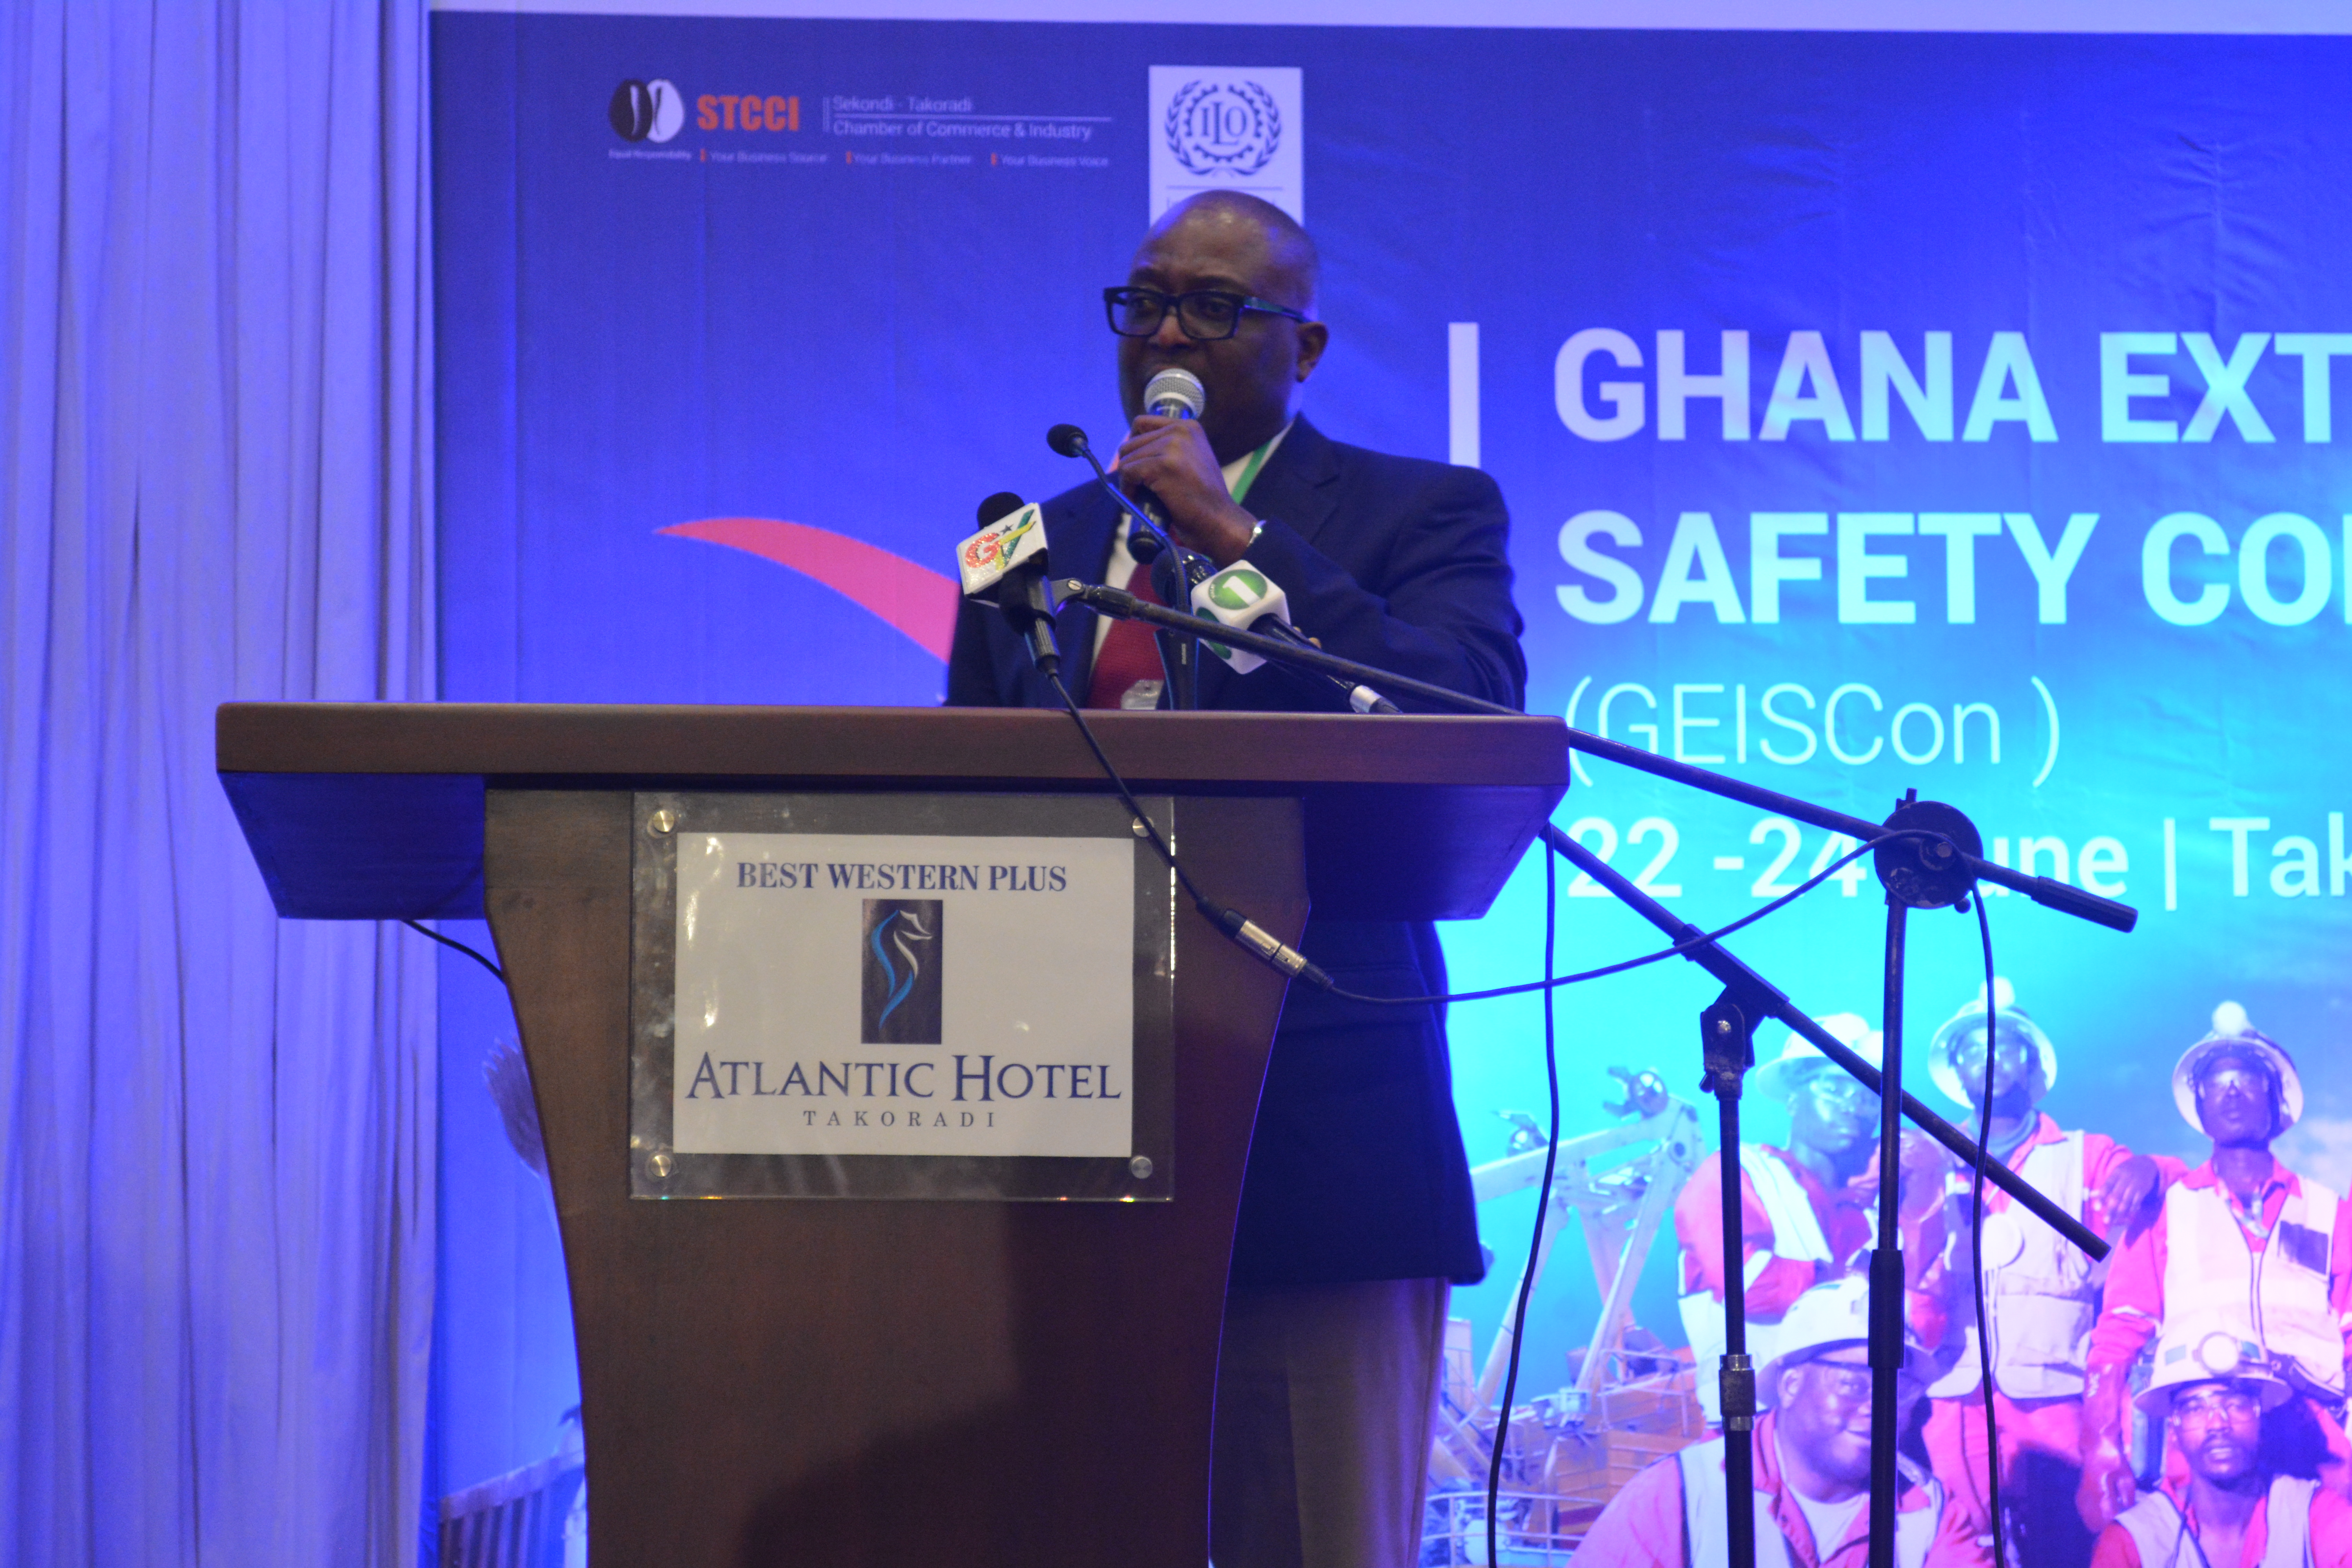 Dr Kwame Boakye-Agyei, Director for Health, Safety, Environment and Security, KOSMOS